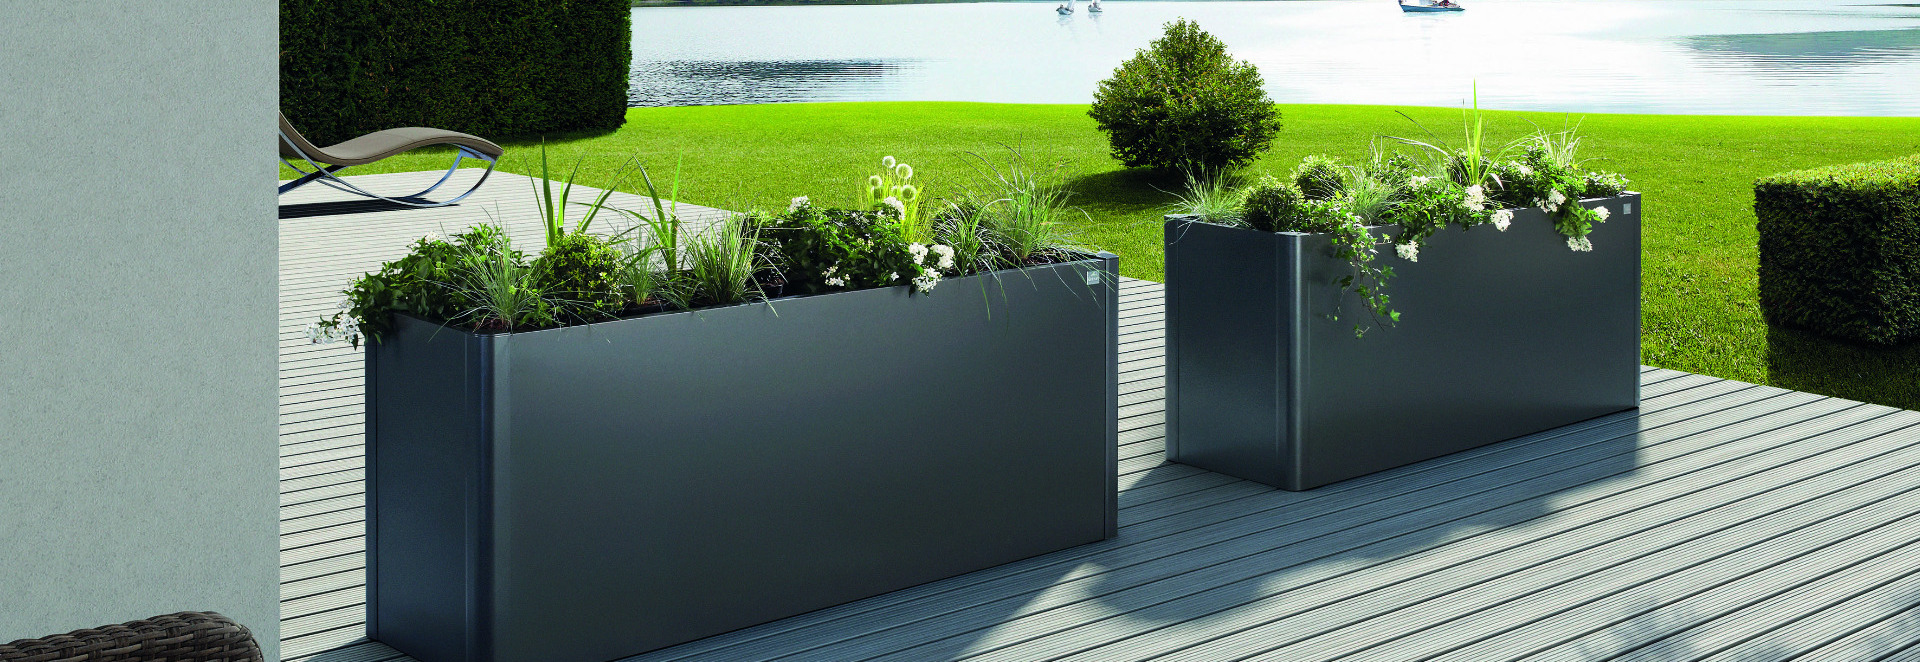 Biohort Belvedere Planters - extremely durable metal planters, perfect for garden, balcony and patio areas | On sale now at Owen Chubb GardenStudio, Terenure. 087-2306 128